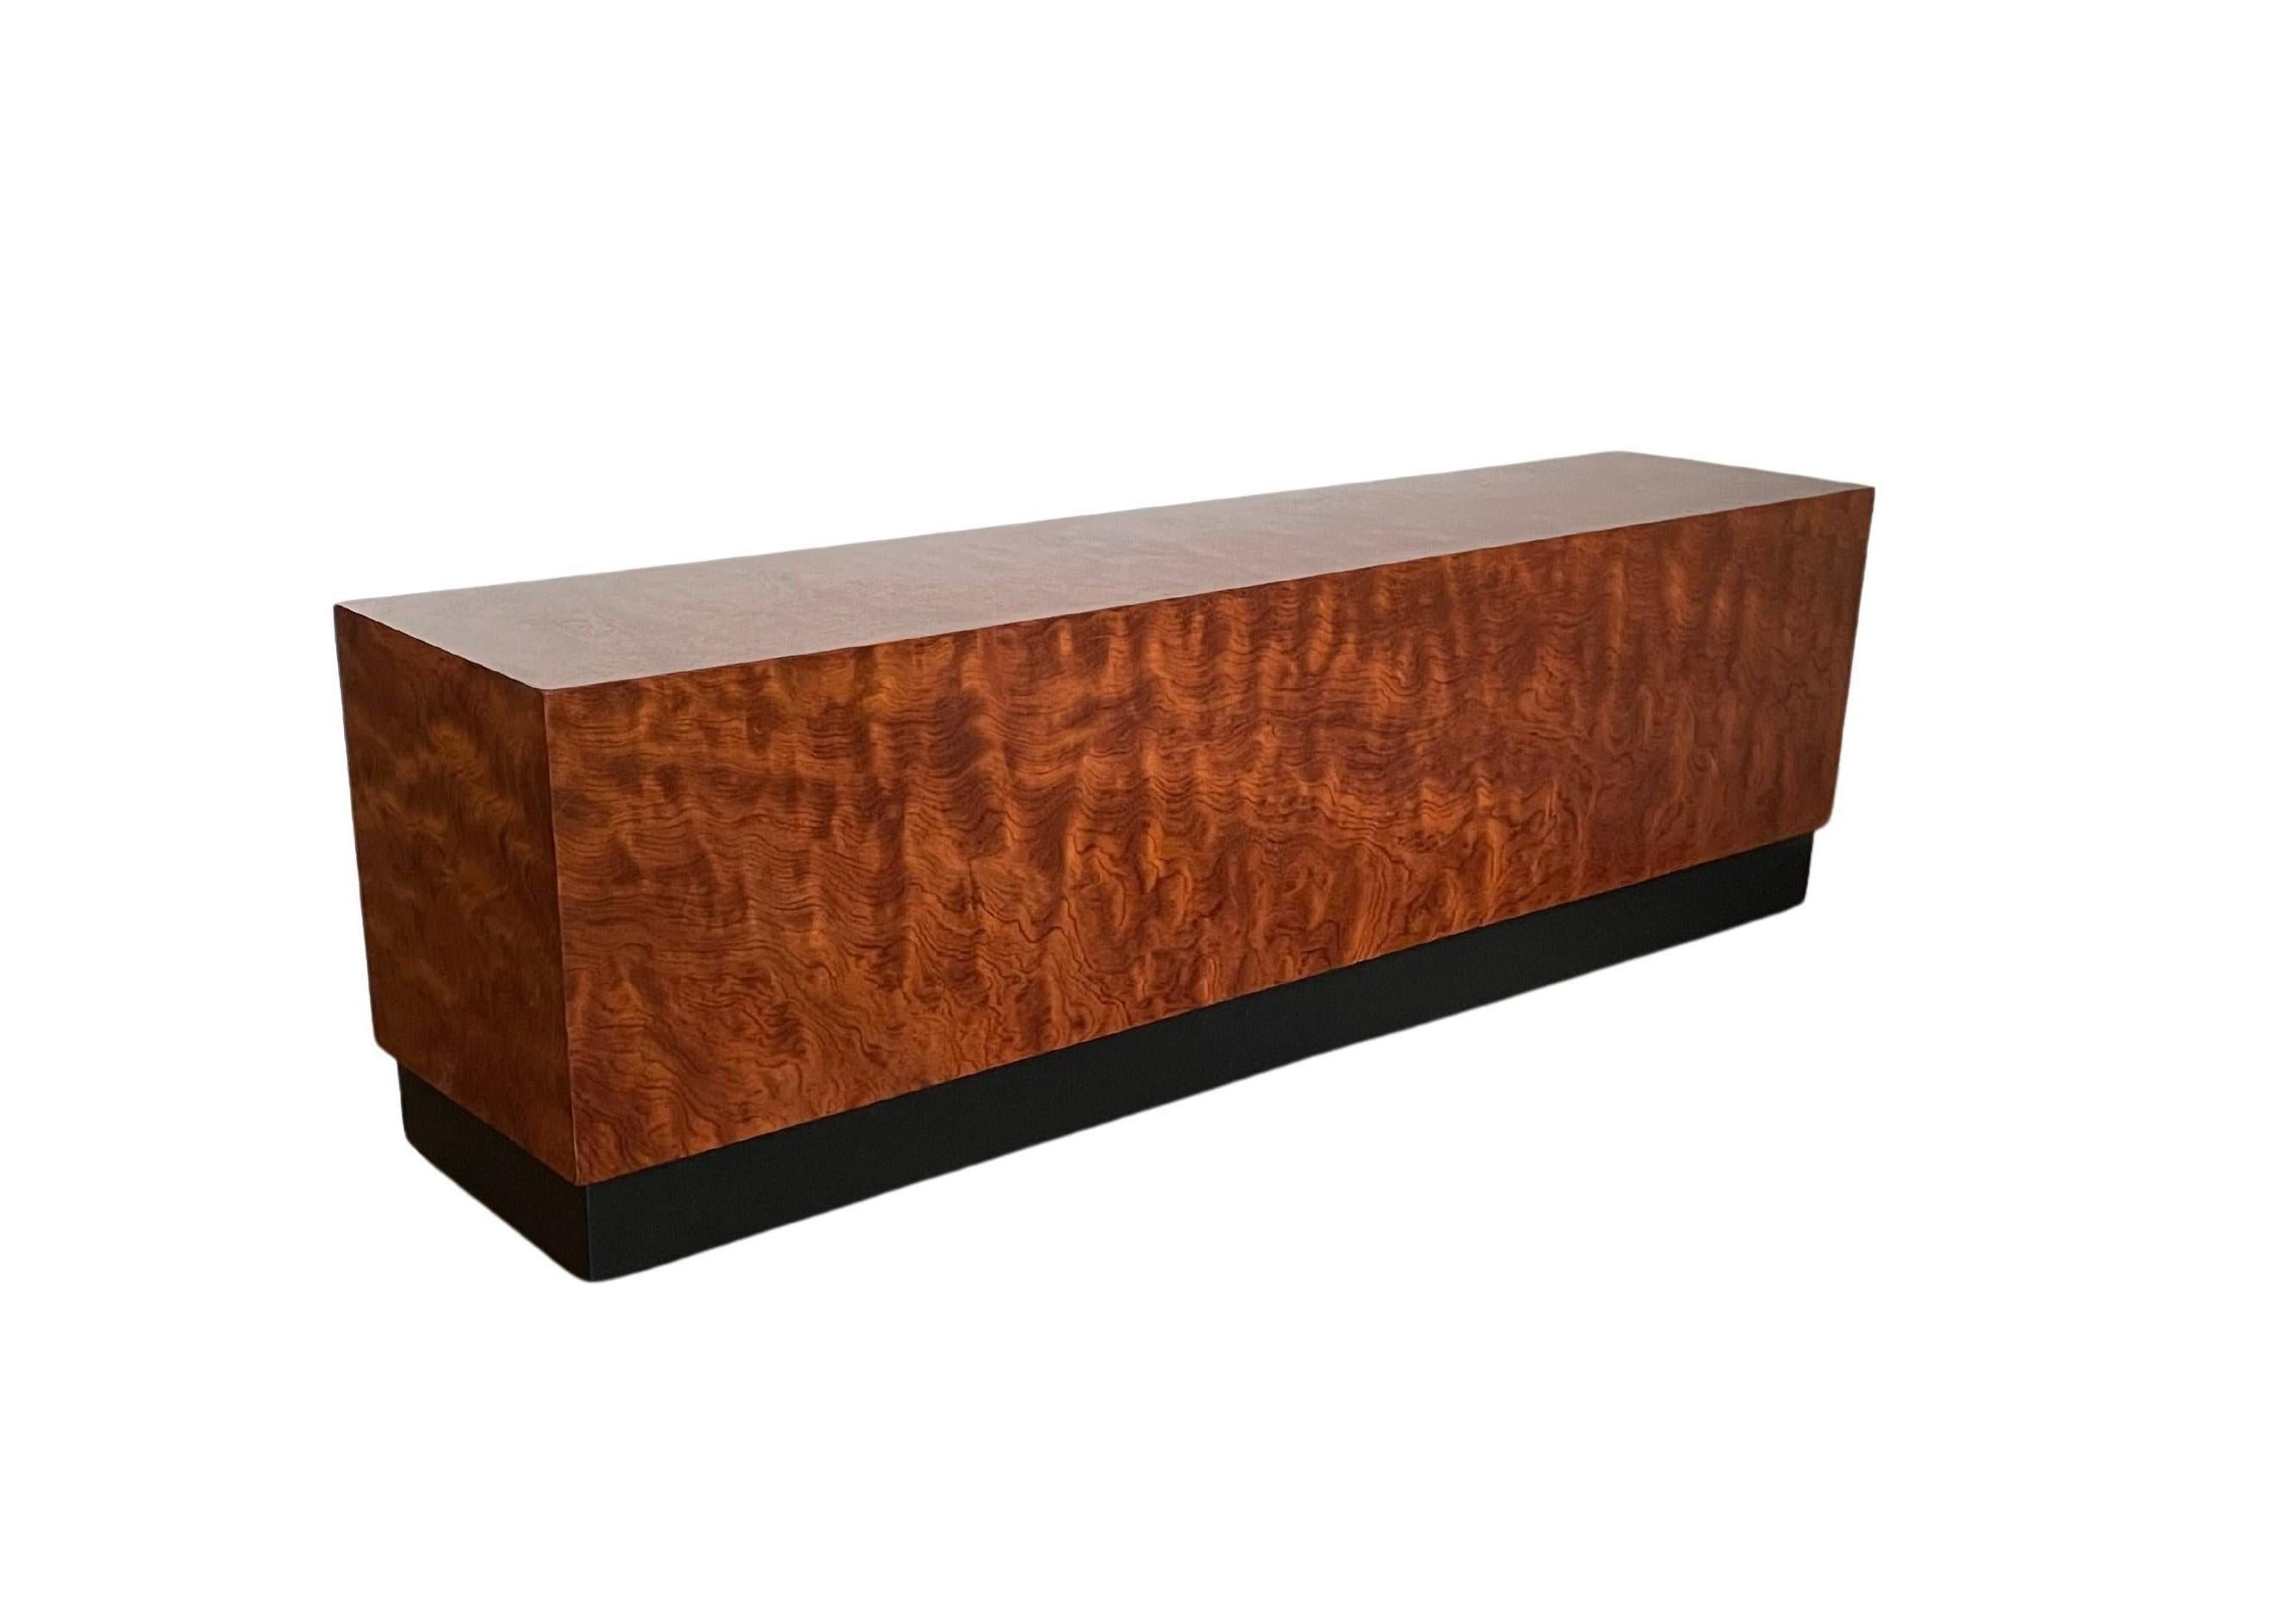 This versatile piece is a must for any space, use it as a coffee table or bench. Similar to designs by Milo Baughman for Thayer Coggin, Harvey Probber, Adrian Pearsall for Craft Associates to name a few. It's the epitome of Mid-Century Minimalism.